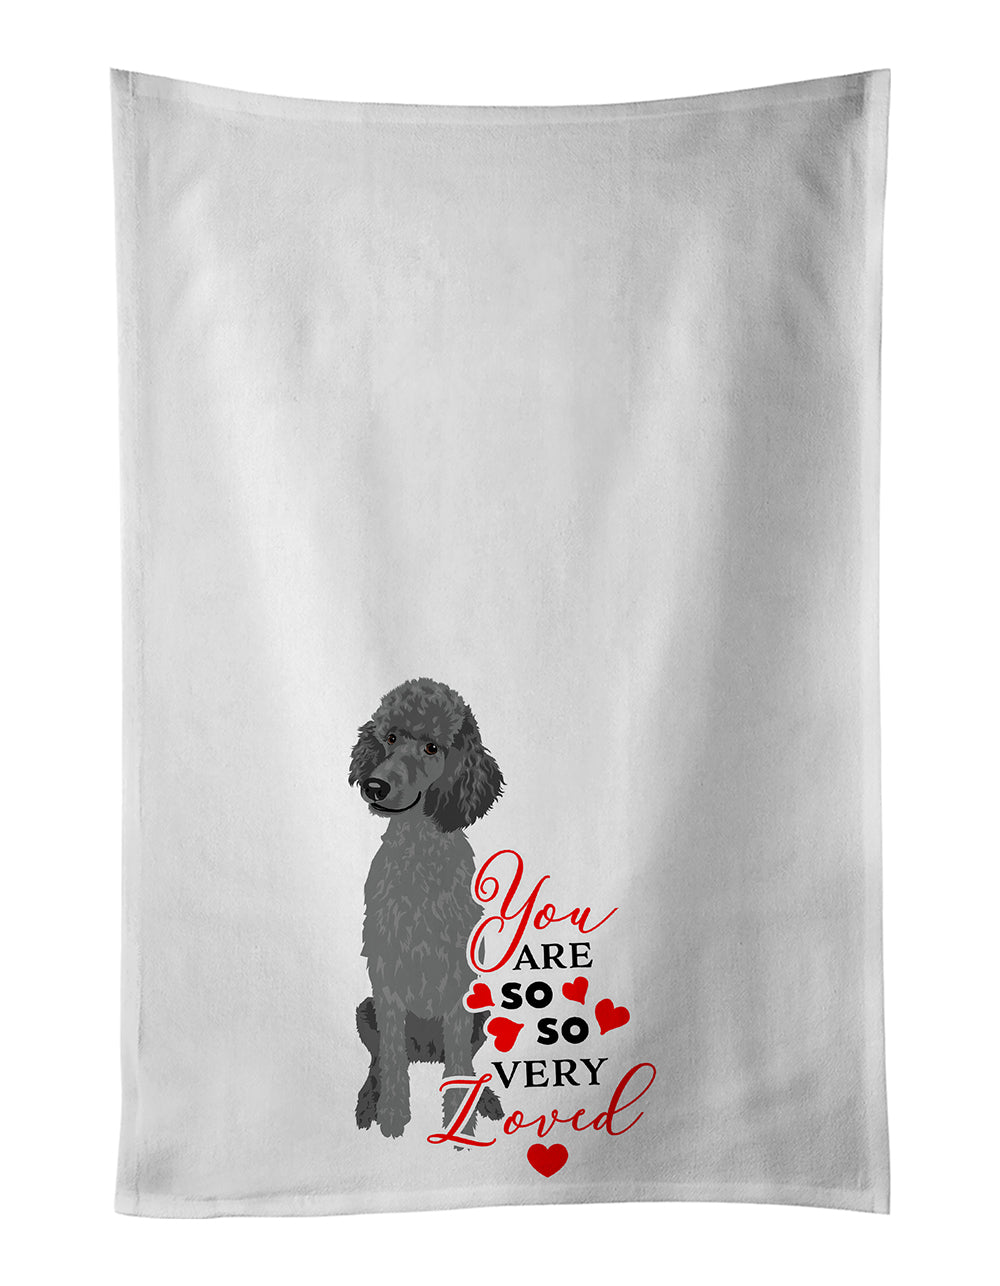 Buy this Poodle Standard Gray so Loved White Kitchen Towel Set of 2